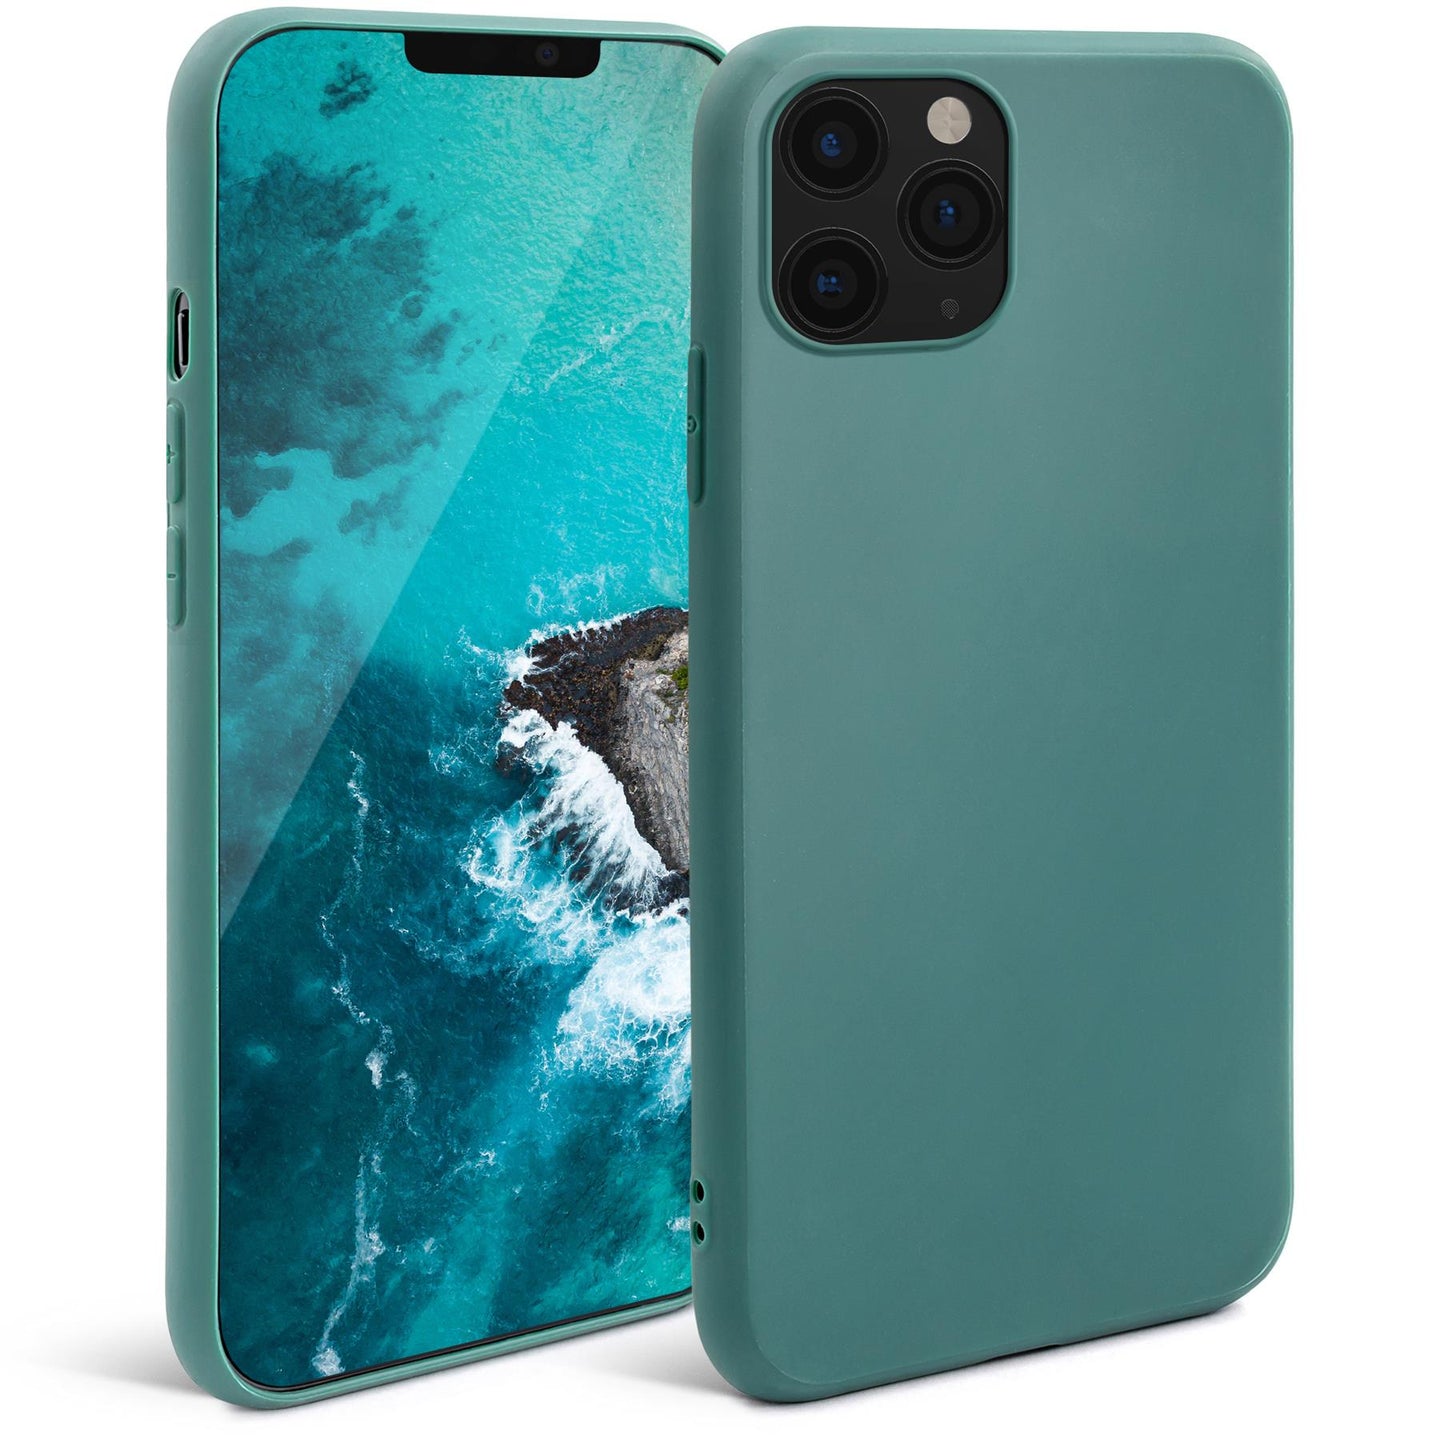 Moozy Minimalist Series Silicone Case for iPhone 11 Pro, Blue Grey - Matte Finish Slim Soft TPU Cover